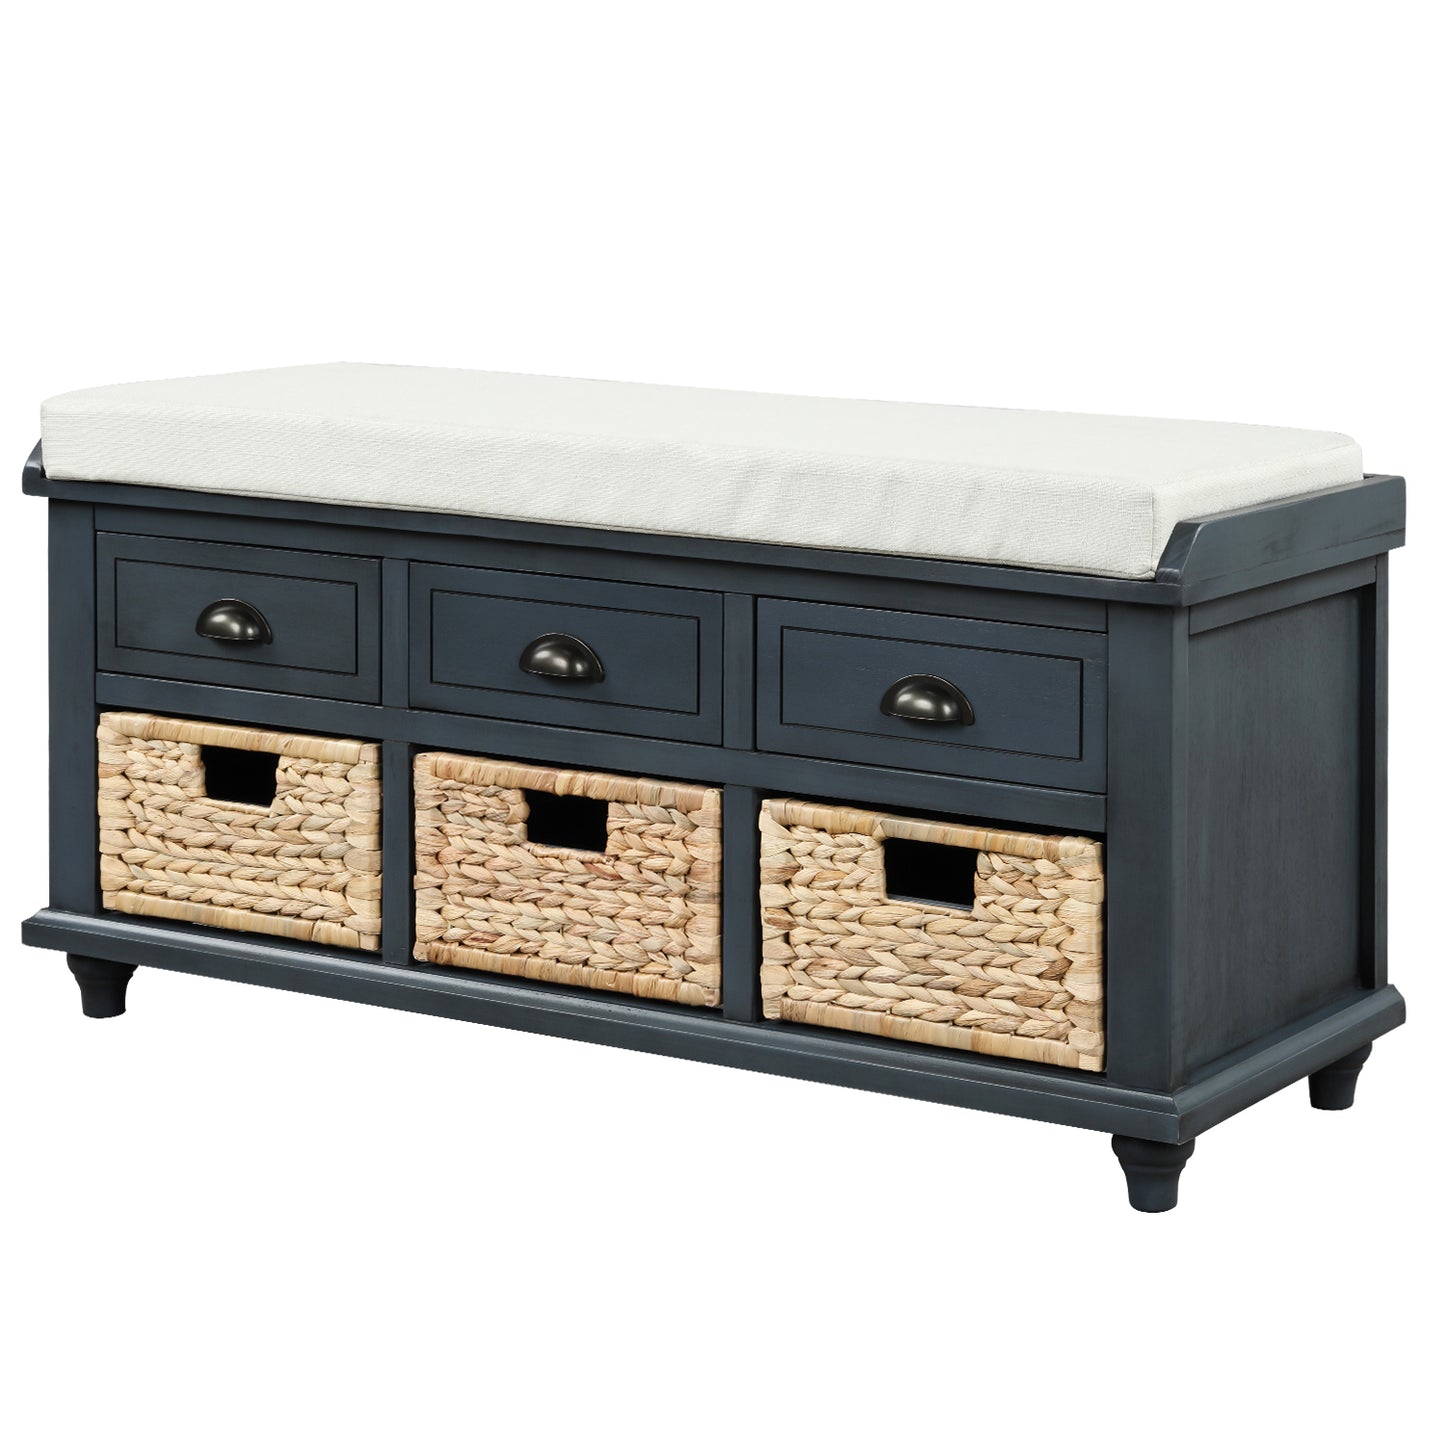 TREXM Rustic Storage Bench with 3 Drawers and 3 Rattan Baskets - Antique Navy